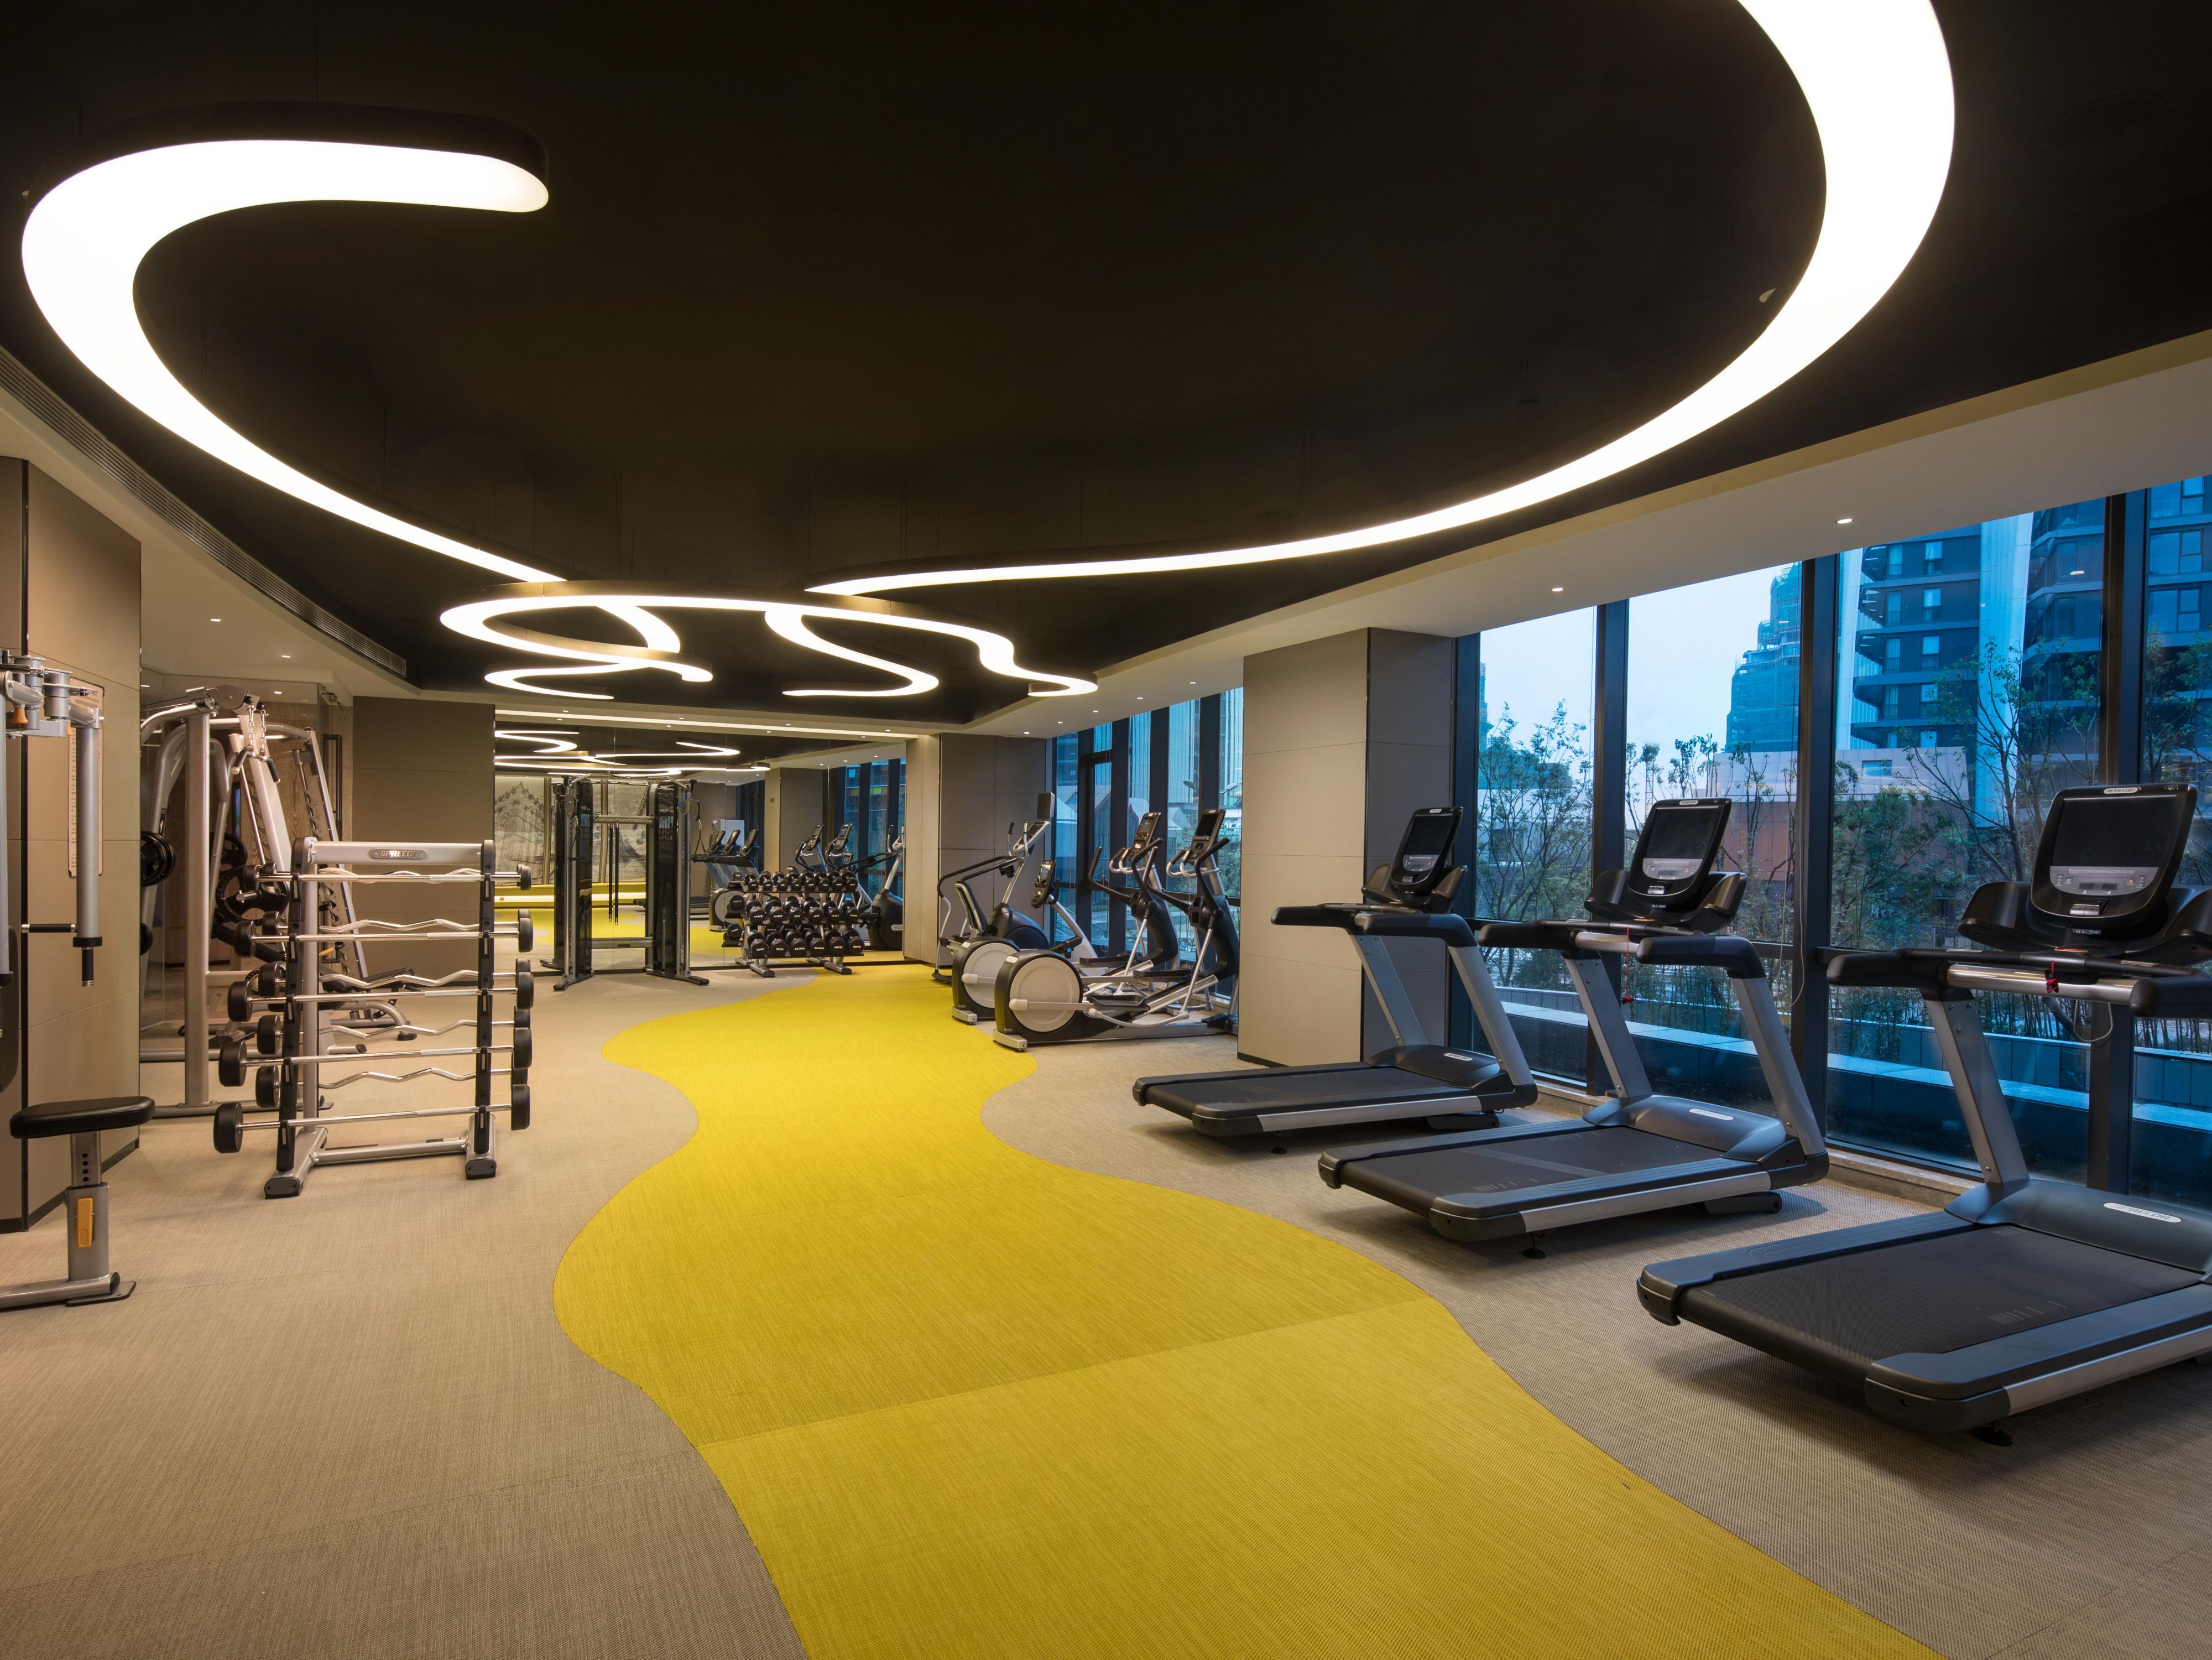 The fitness center of Holiday Inn Nanjing South Station is on the second floor. This is complementary and available to our guests 24 hours per day with secure access via your guest room key. Whether on business or holiday, our fitness center’s state-of-the-art facilities will make you relax.